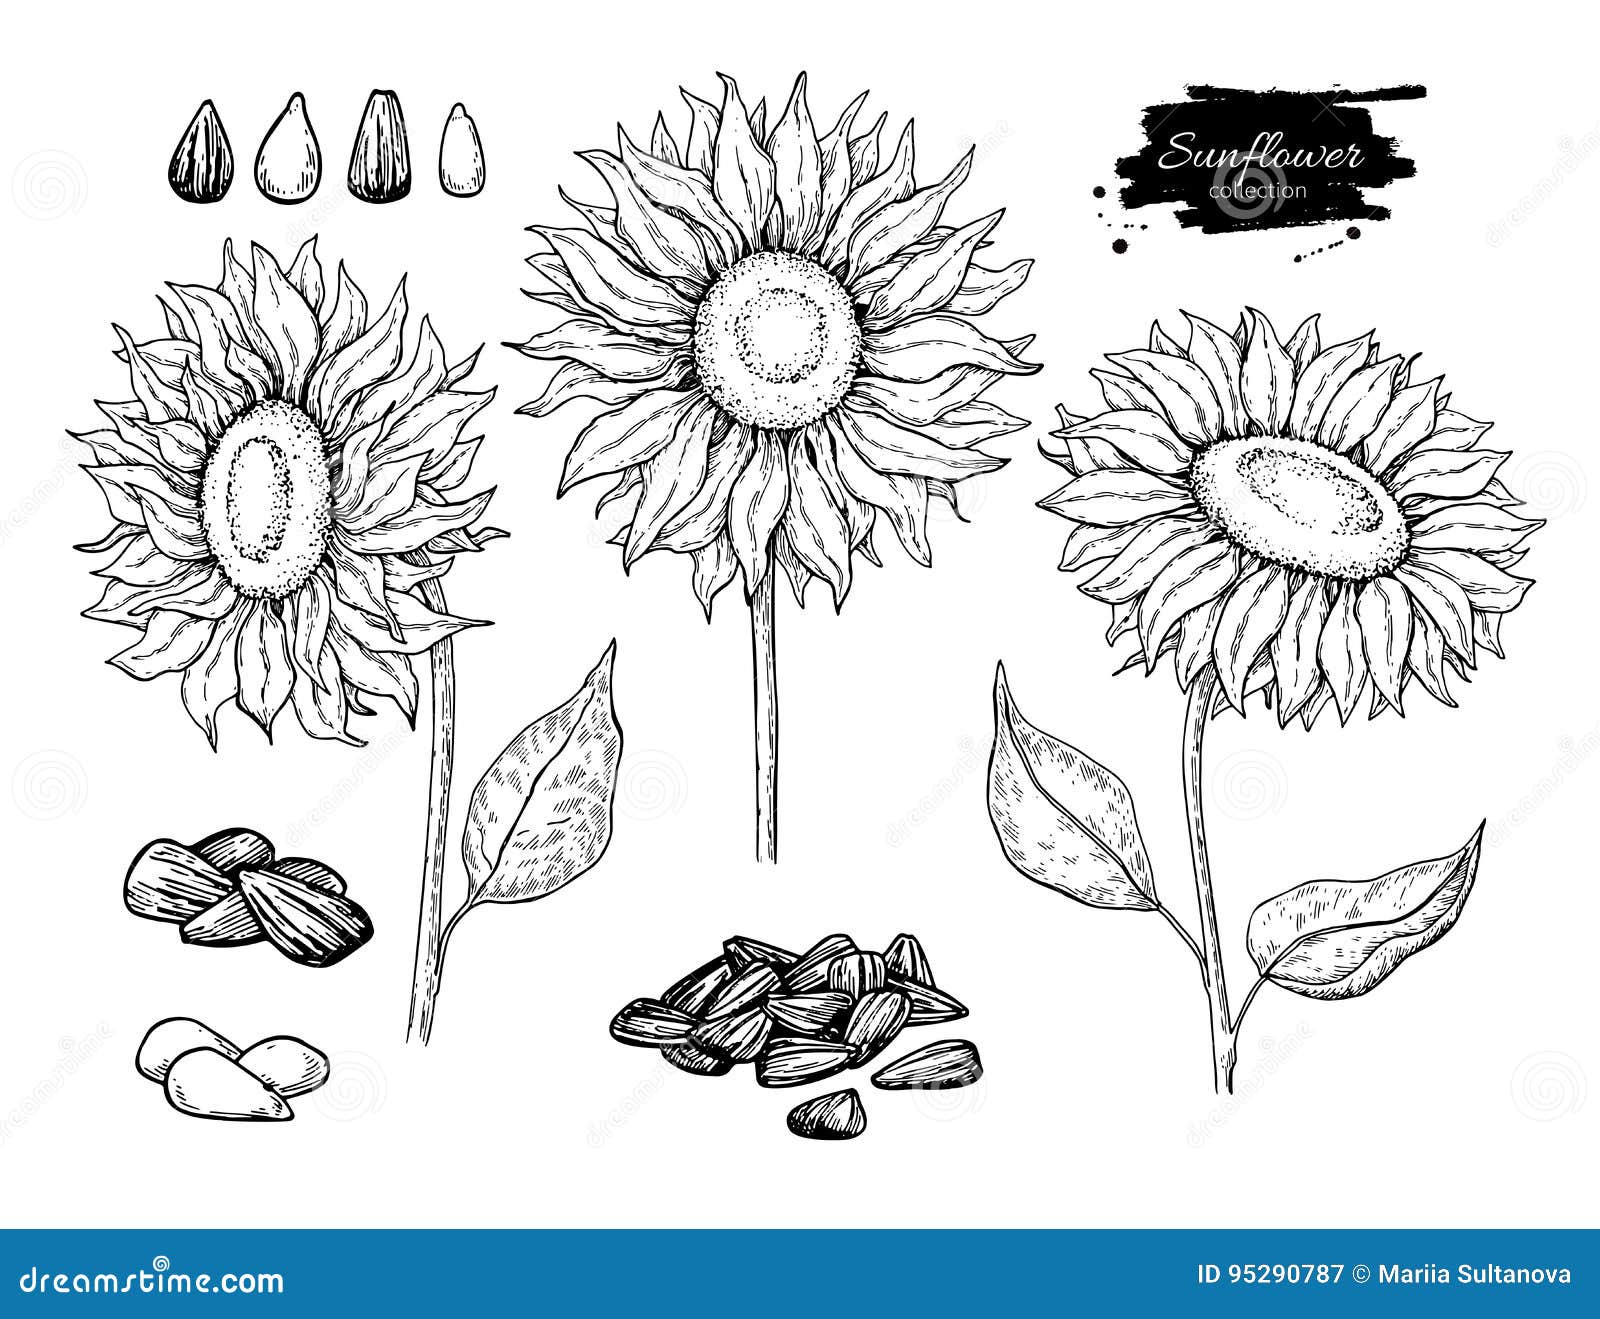 sunflower seed and flower  drawing set. hand drawn  . food ingredient sketch.